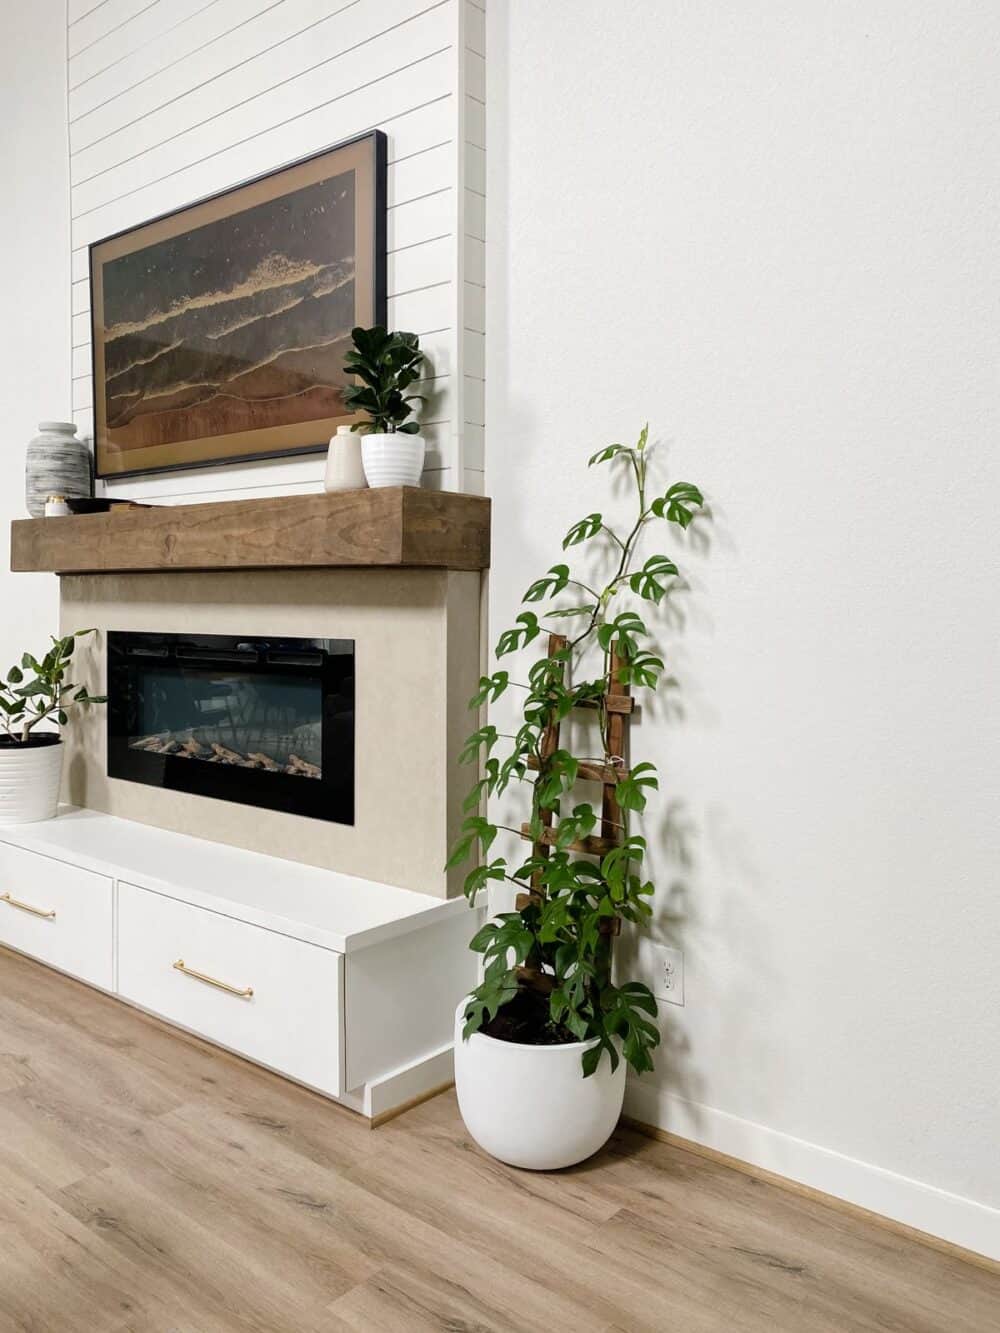 A tall fireplace with a Rhaphidophora Tetrasperma sitting next to it